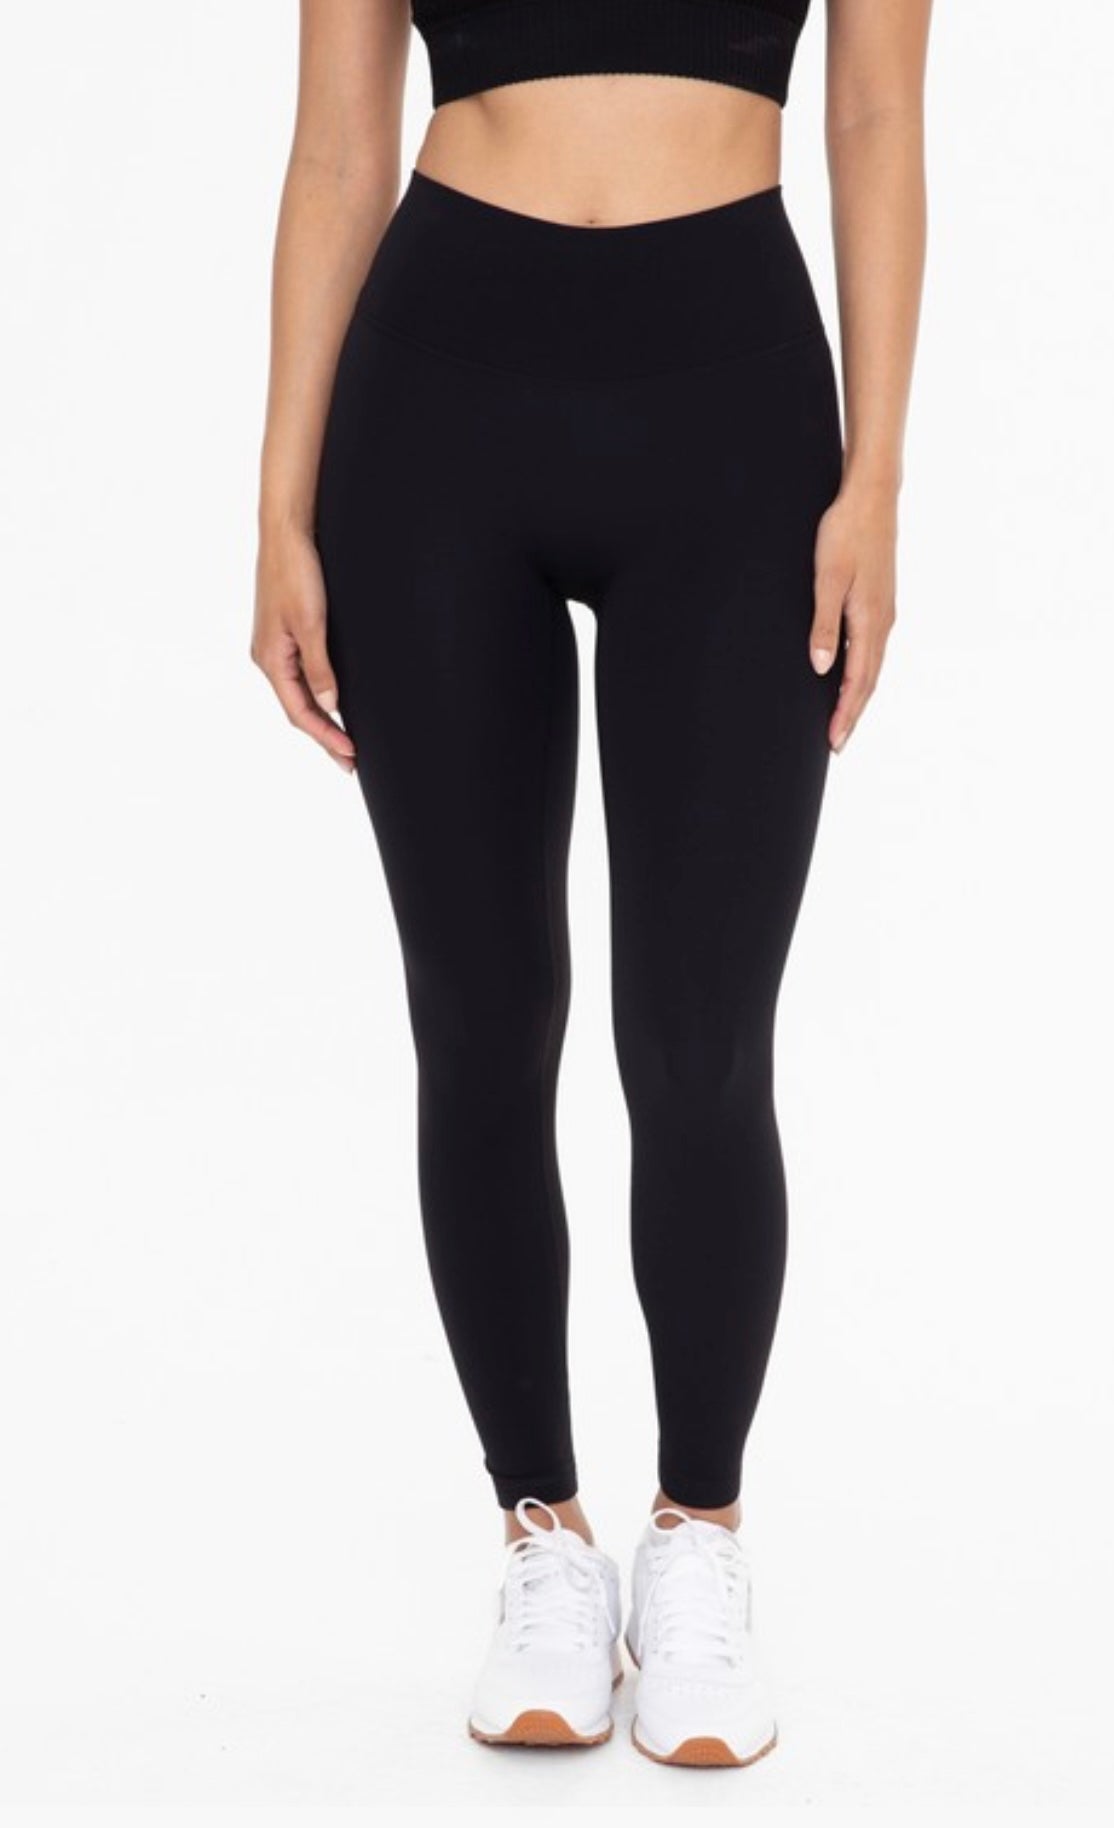 Shine fleece lined leggings – Beatrice and Lilly